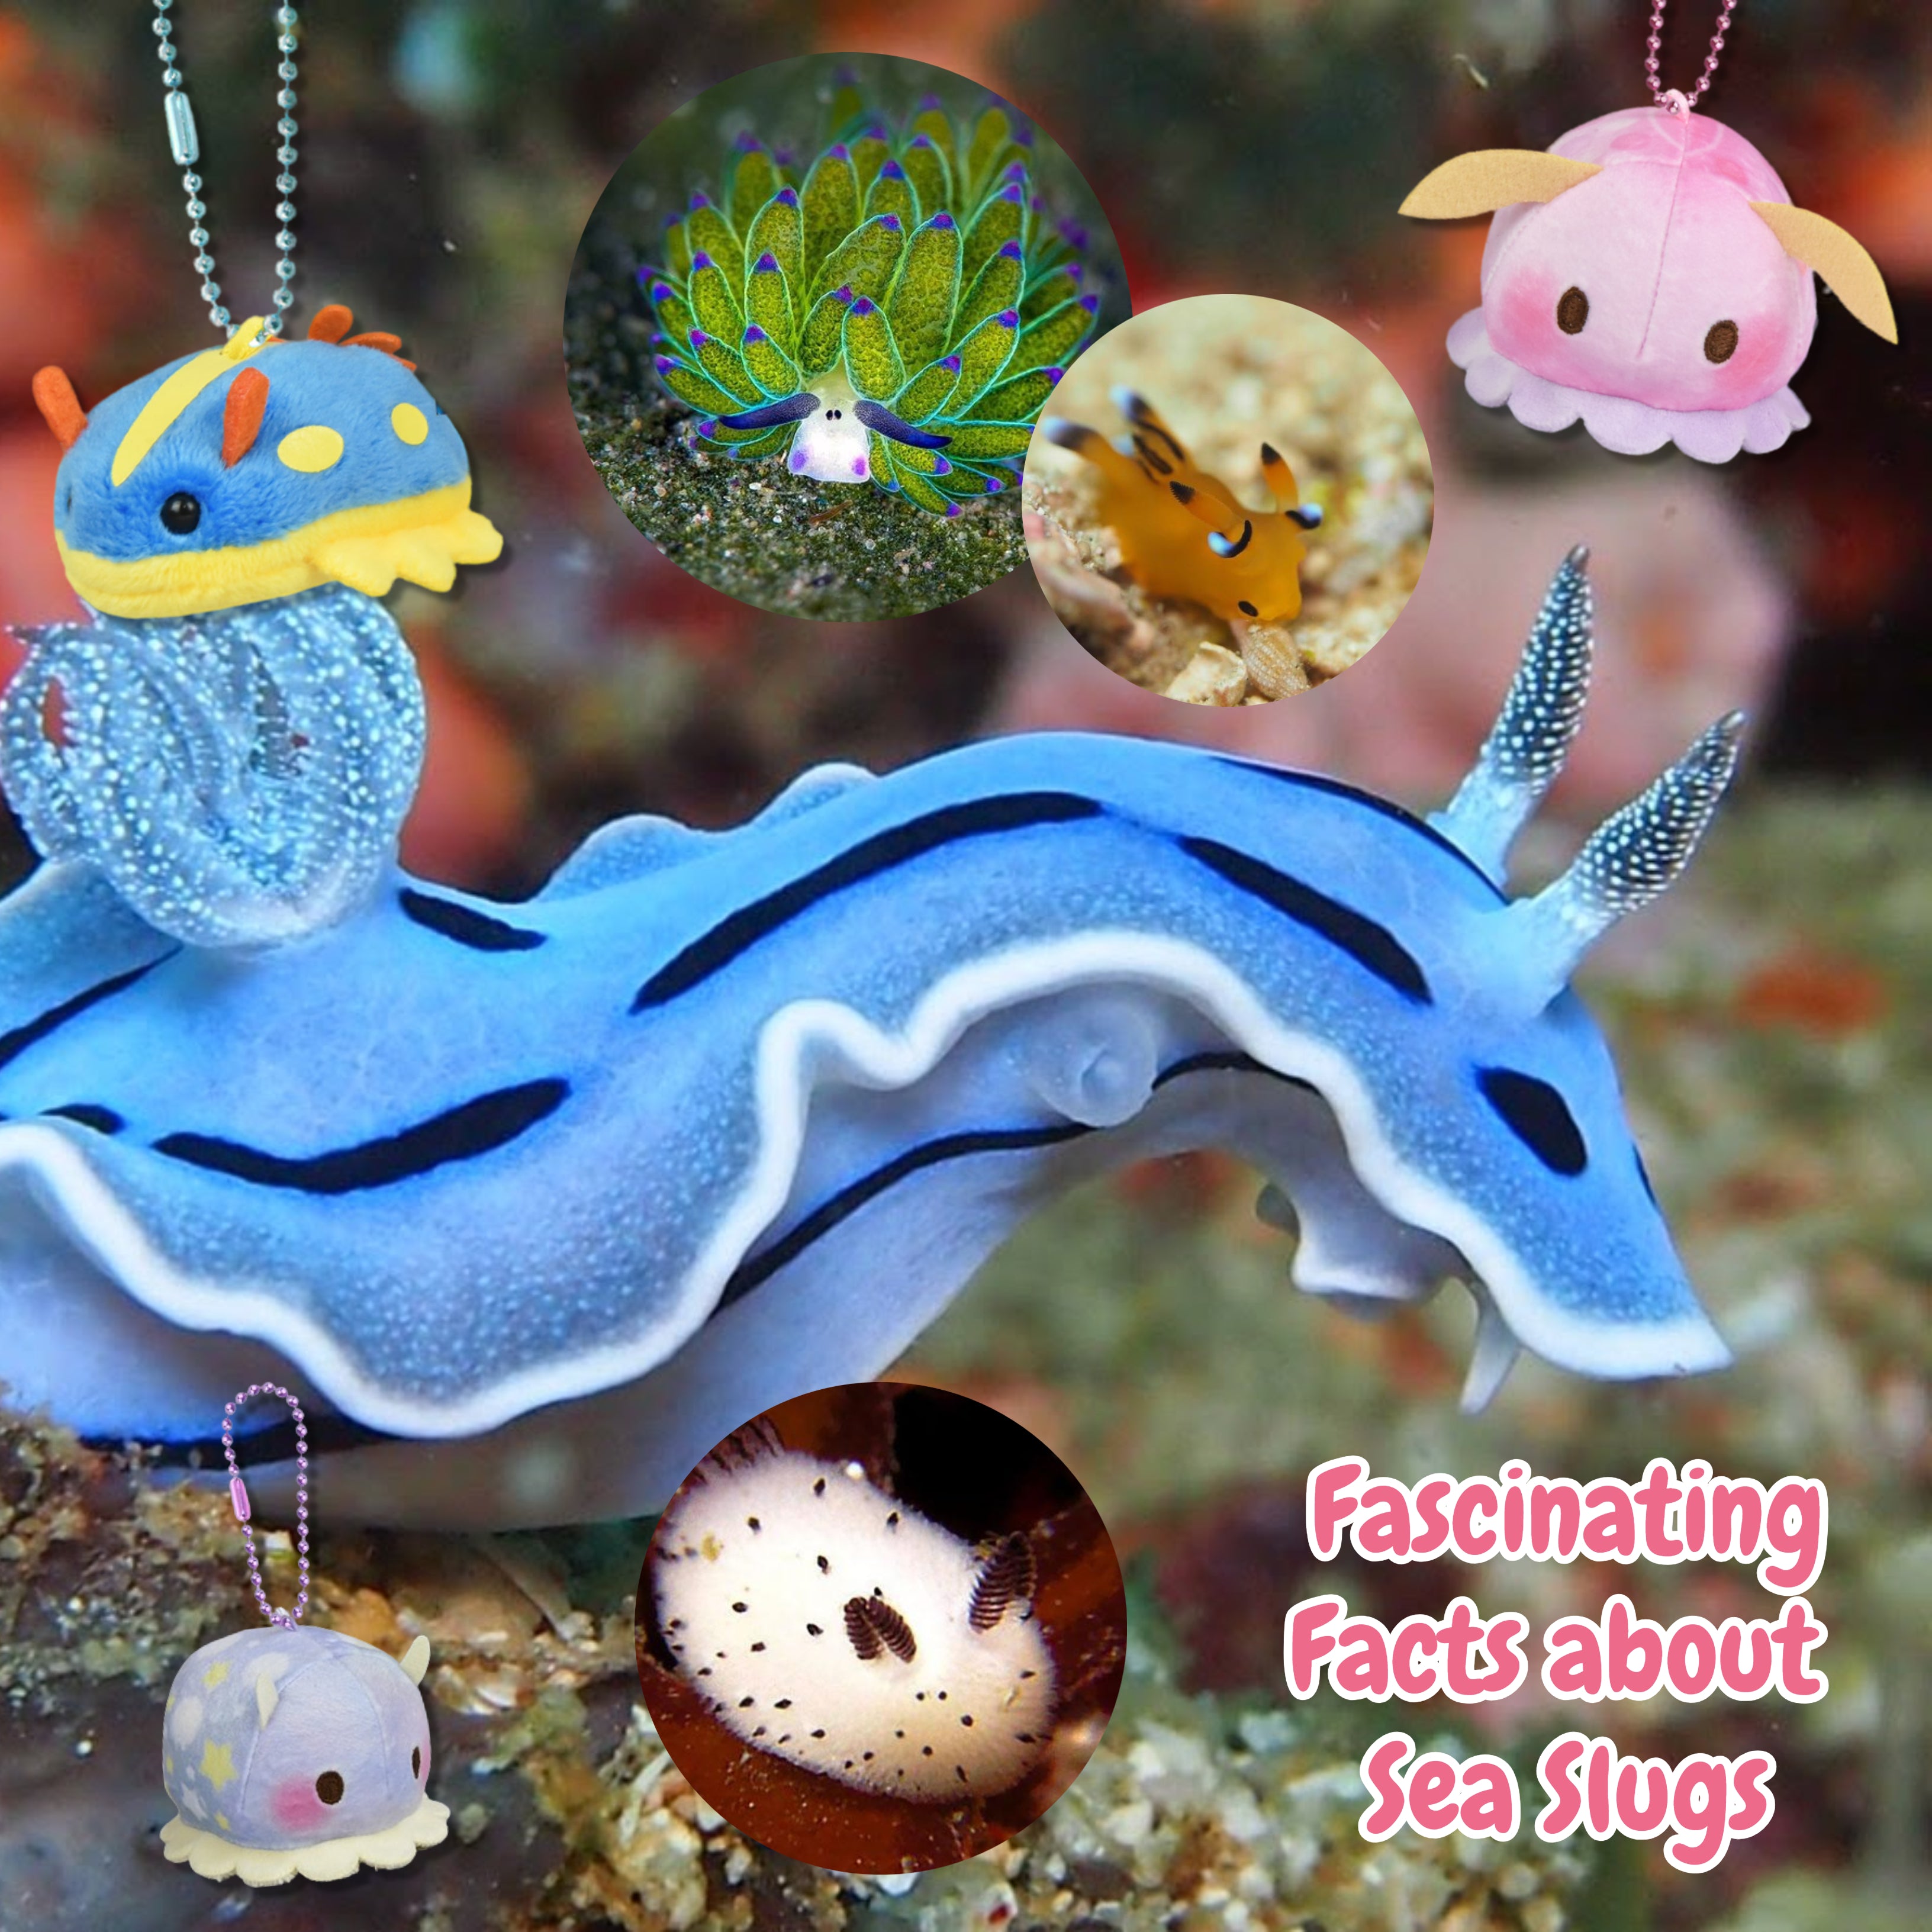 Fascinating Facts about Sea Slugs